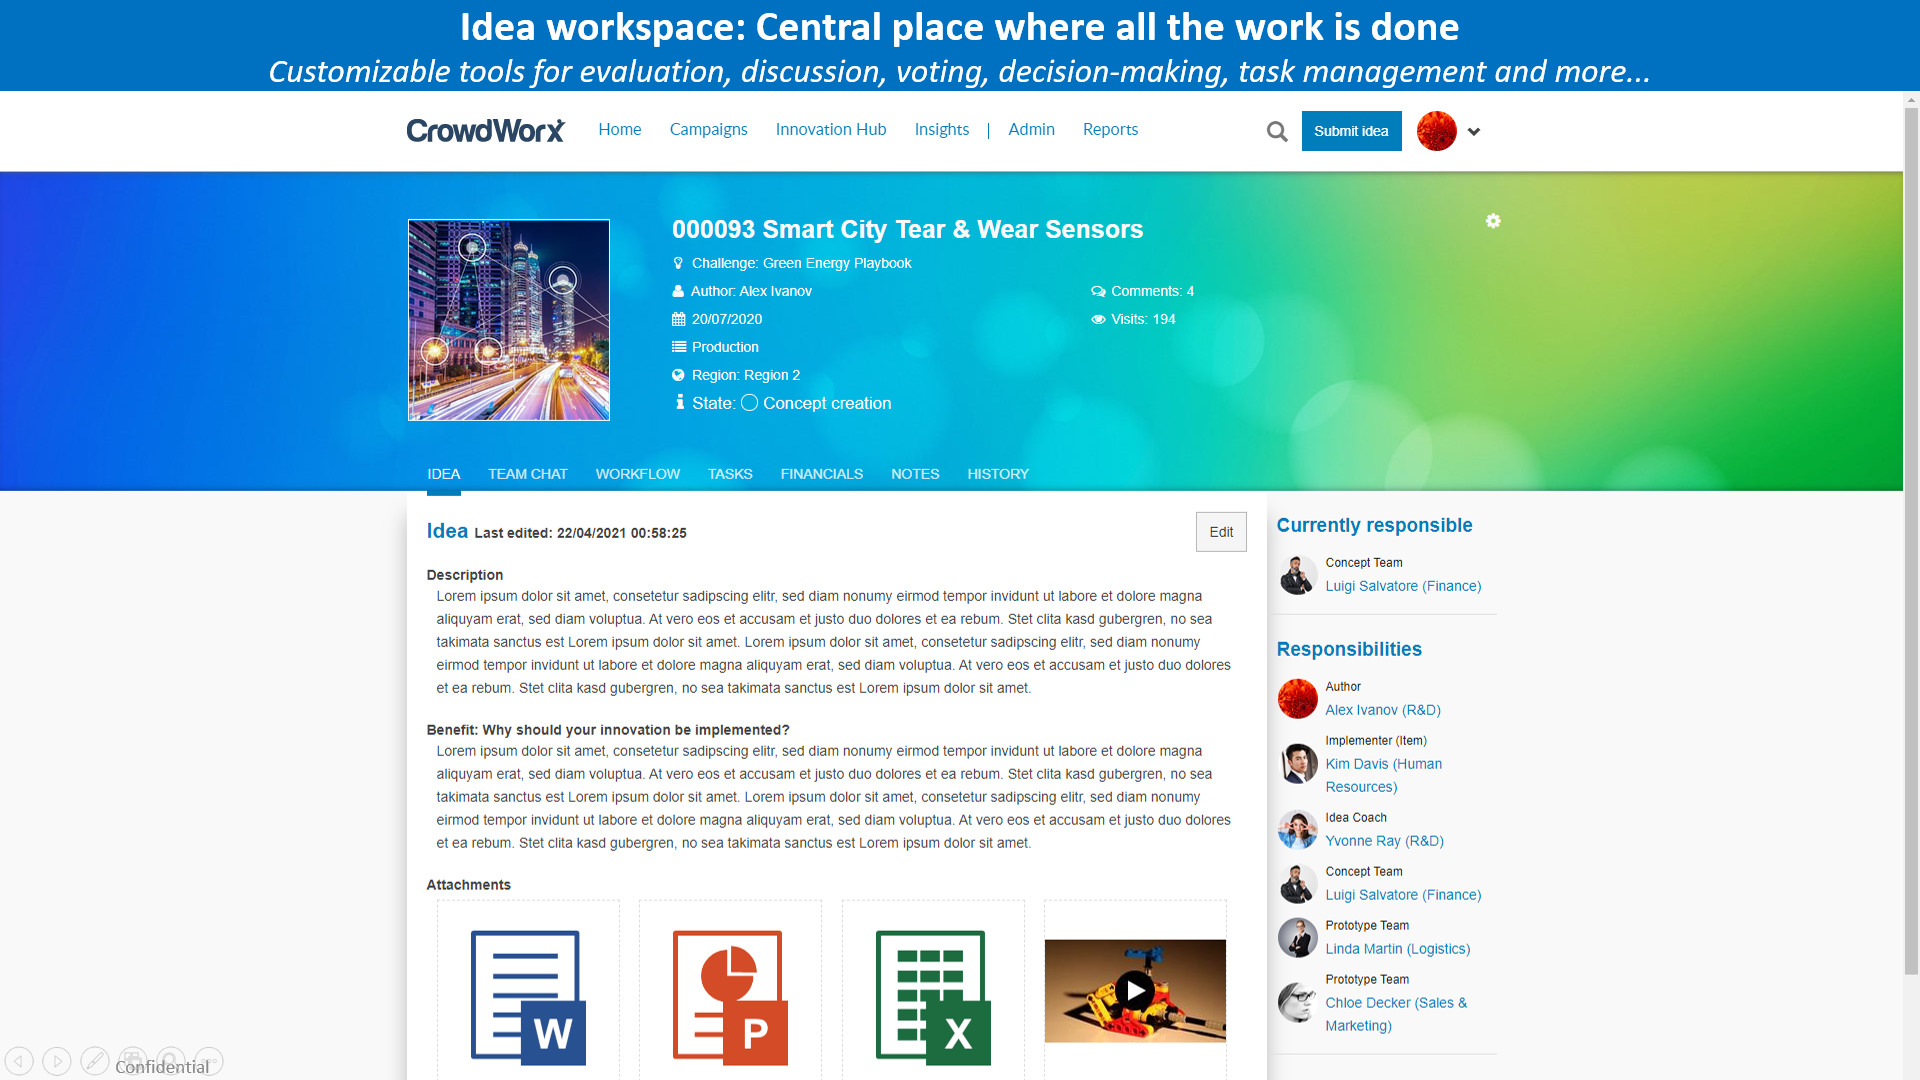 Idea Workspace: Central place where all the work gets done